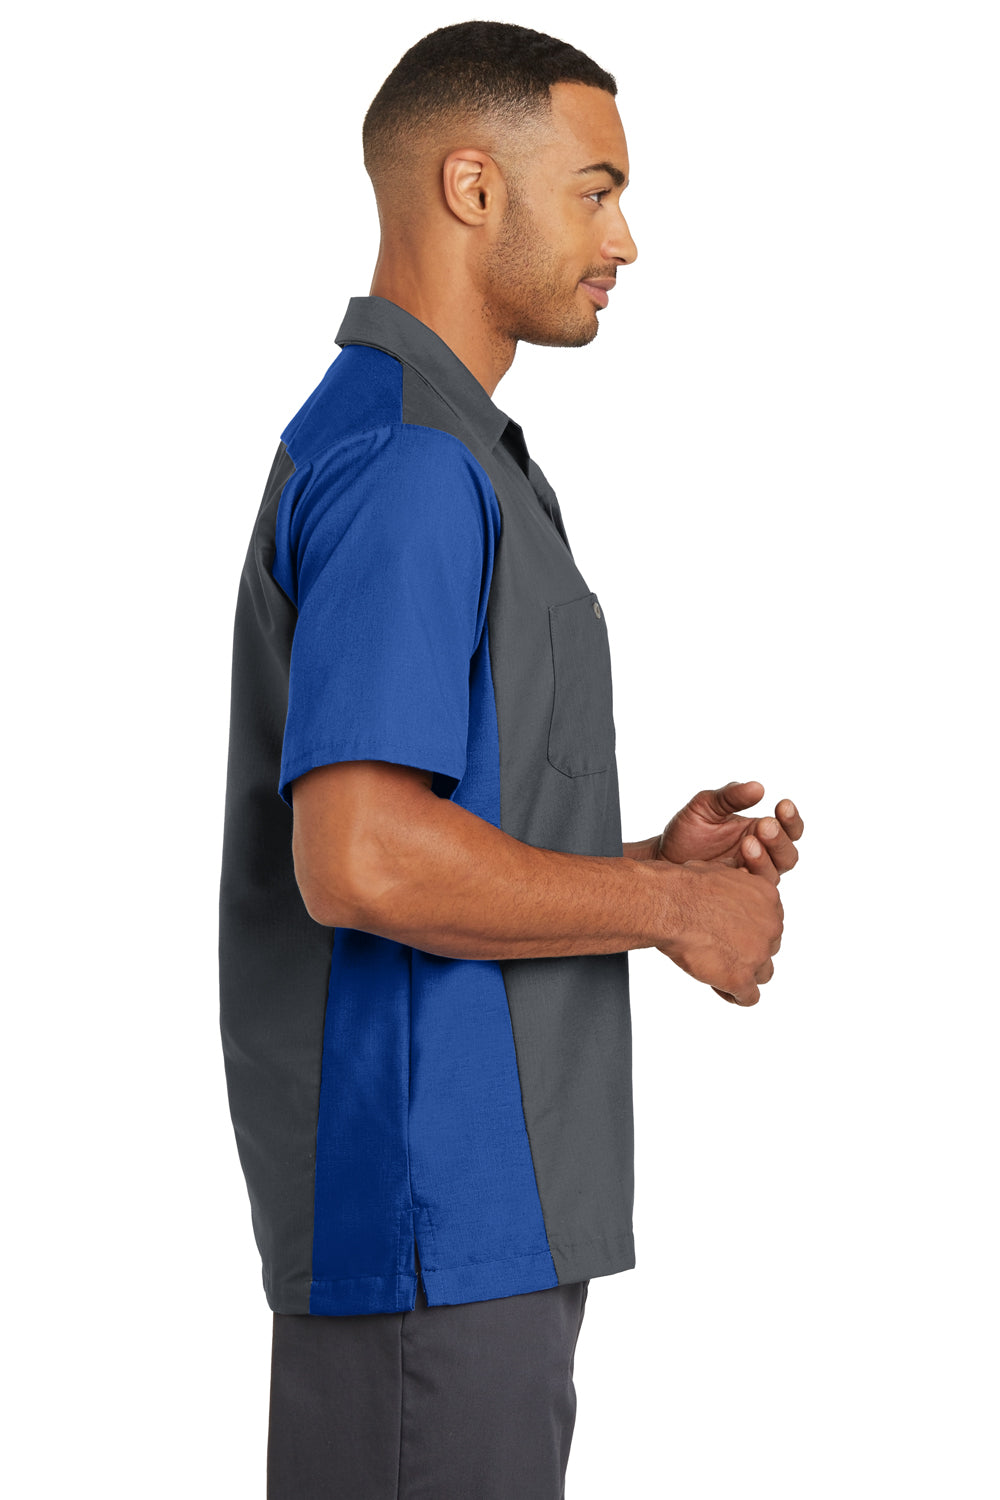 Red Kap SY20 Mens Crew Moisture Wicking Short Sleeve Button Down Shirt w/ Double Pockets Charcoal Grey/Royal Blue Side